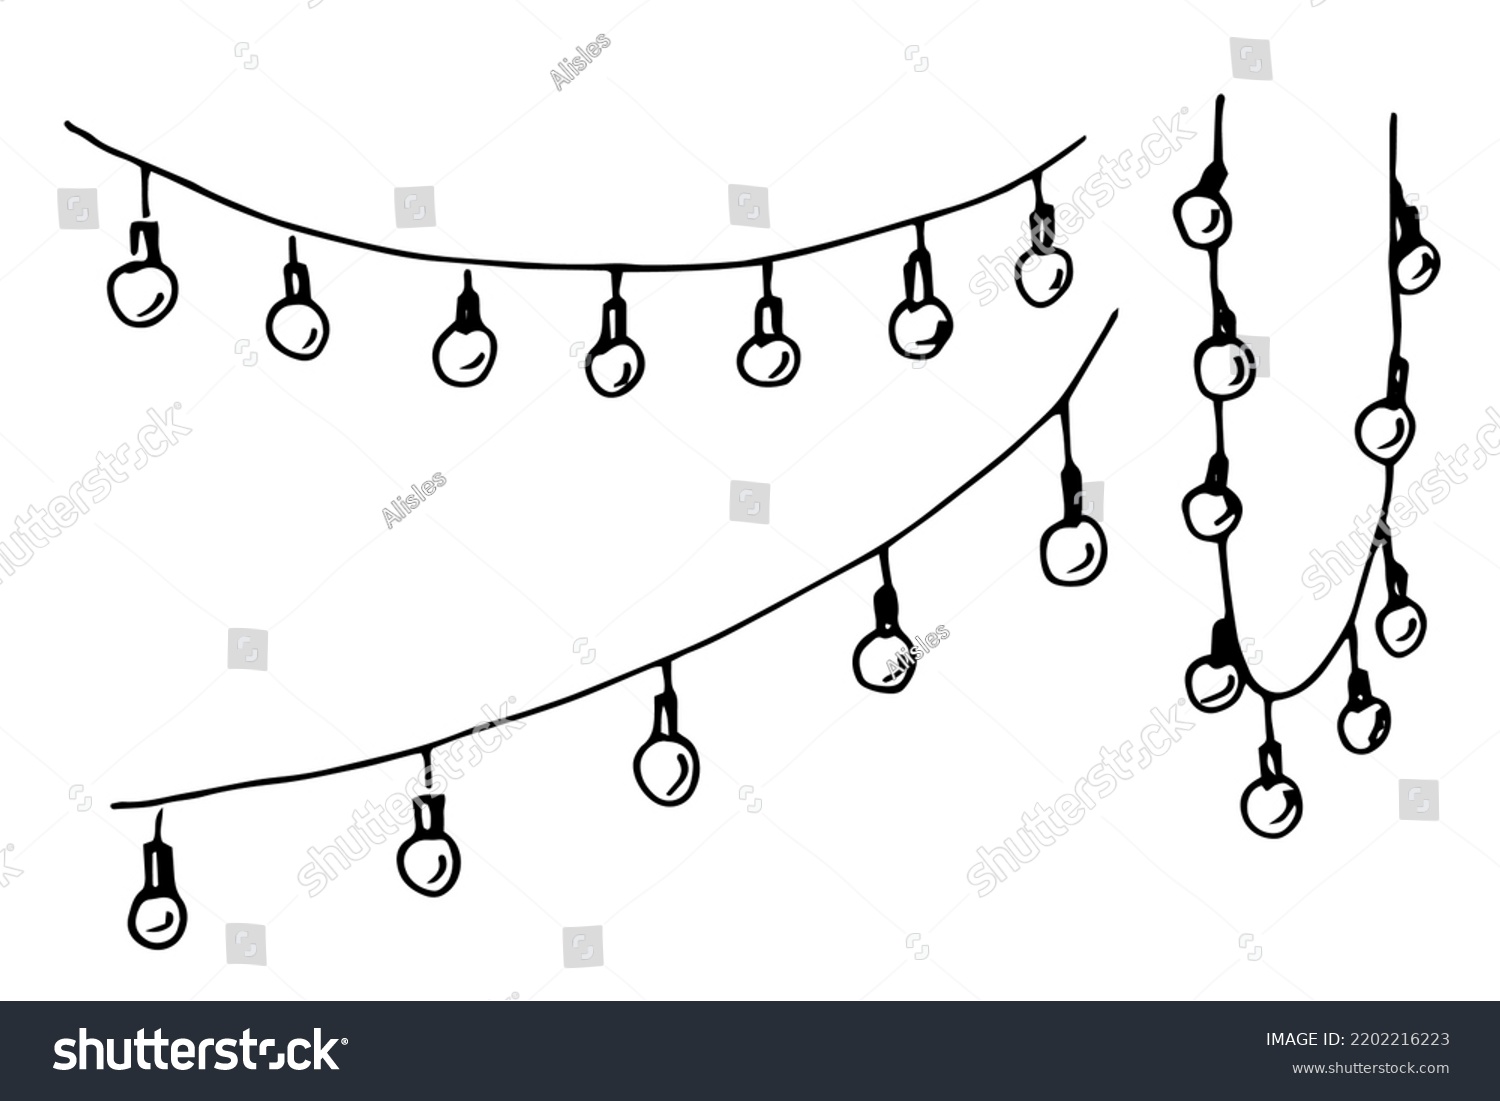 Garland with Lights. Vector hand drawn illustration in doodle style for party. Sketch of hanging pennants on white isolated background #2202216223